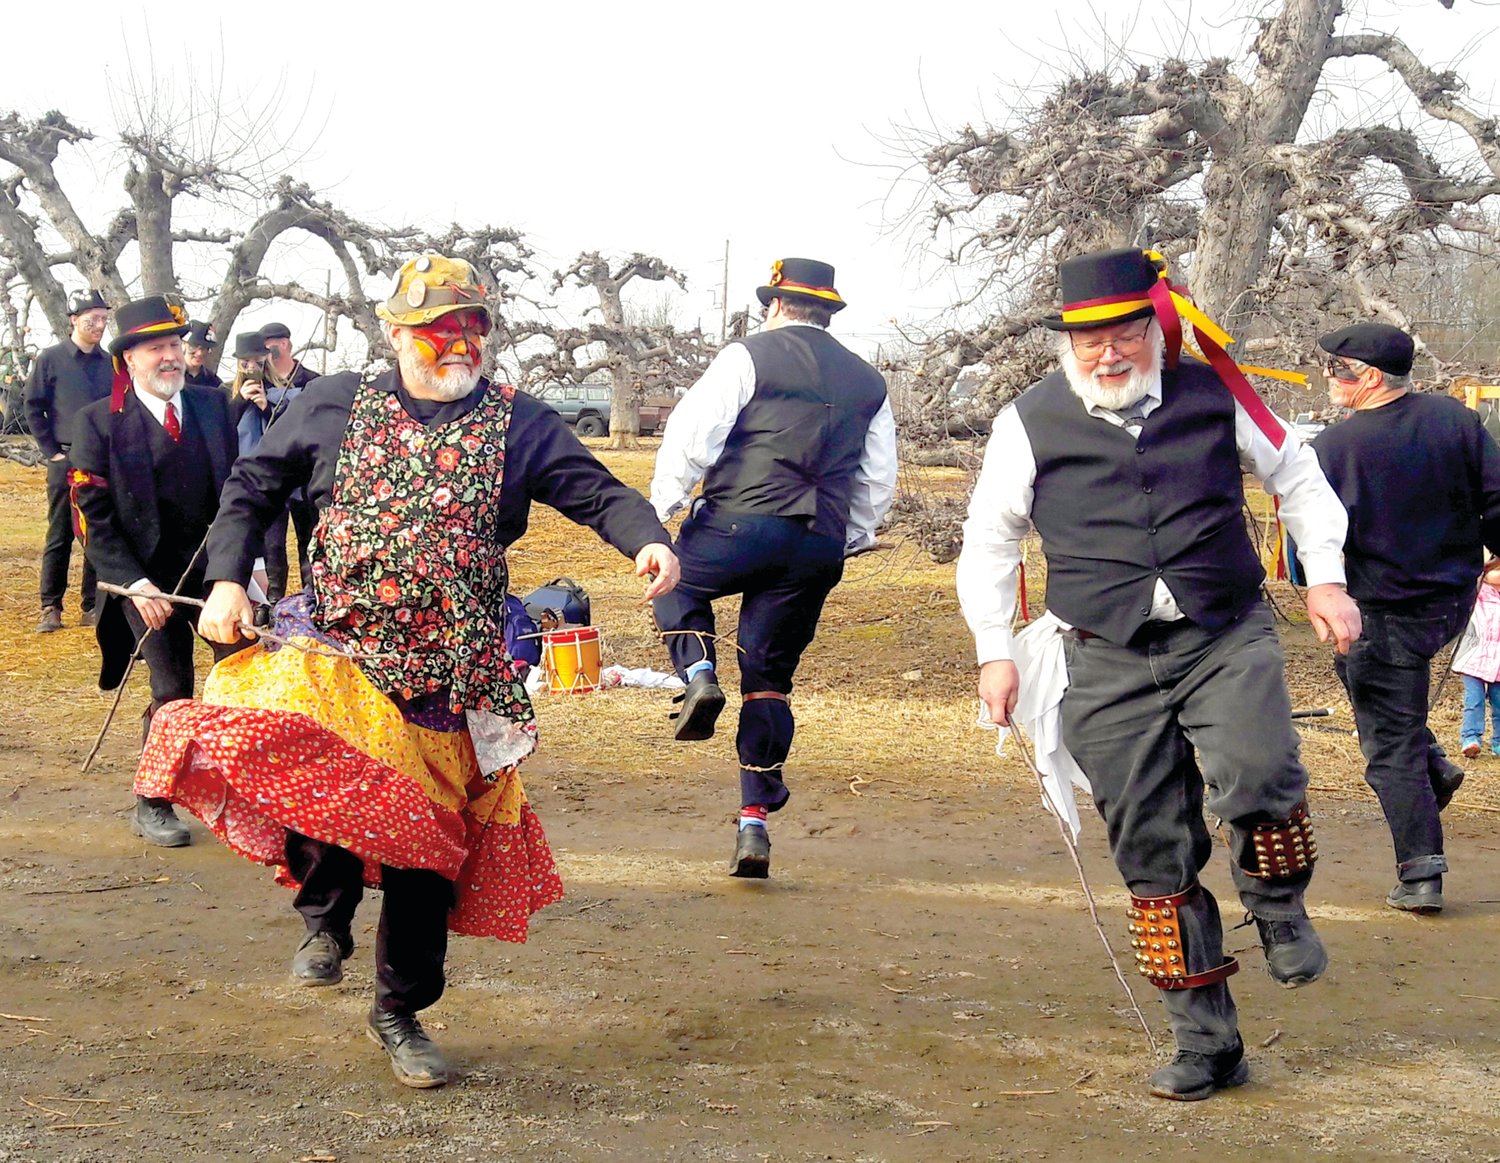 Terhune Orchards in Princeton, N.J., hosts its annual Wassailing the Trees Celebration from 1 to 4 p.m. Sunday, Jan. 29. Here, dancers take part in a prior celebration at Terhune.